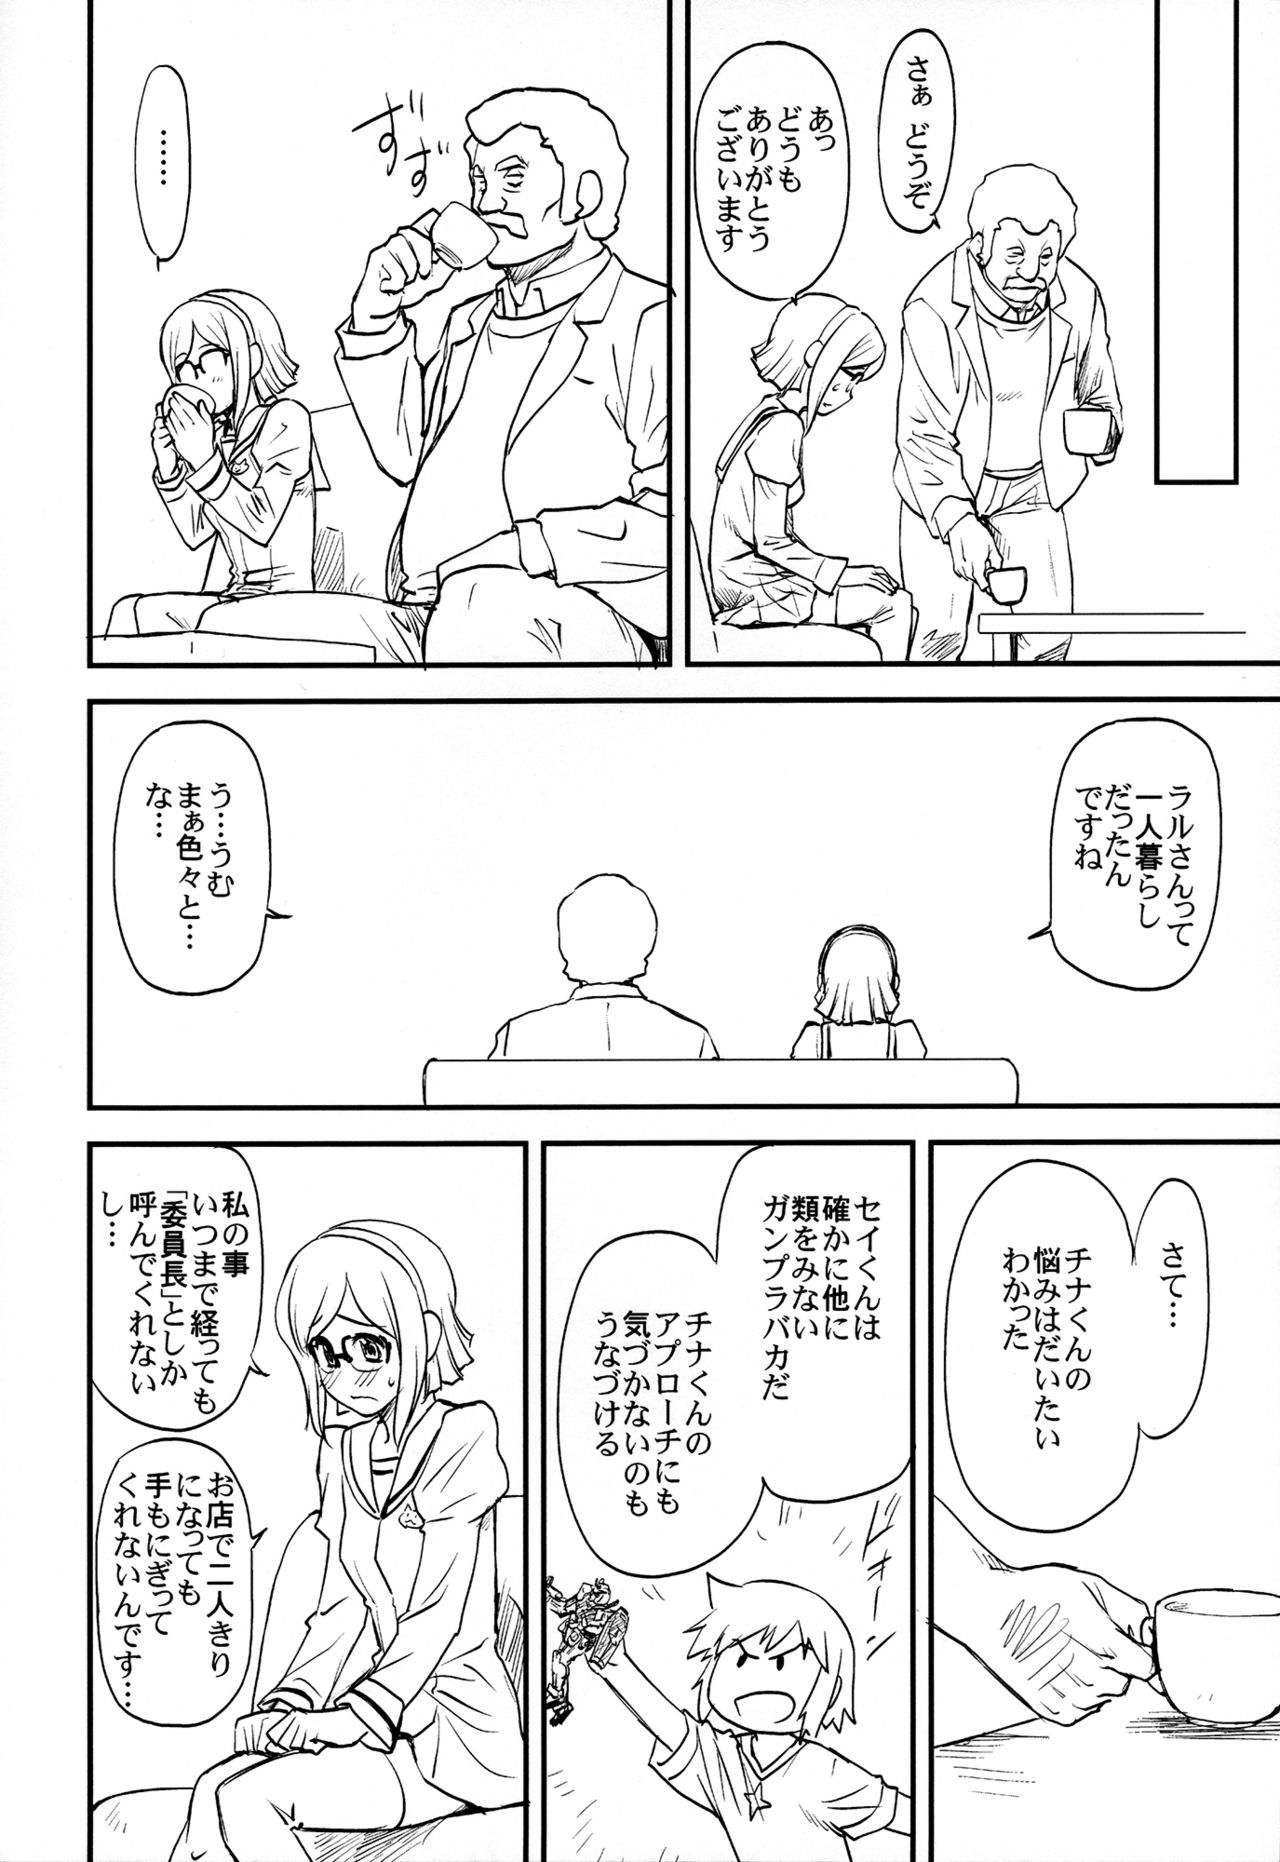 (C86) [Leaf Party (Byakurou, Nagare Ippon)] Ral no Emono (Gundam Build Fighters) page 5 full